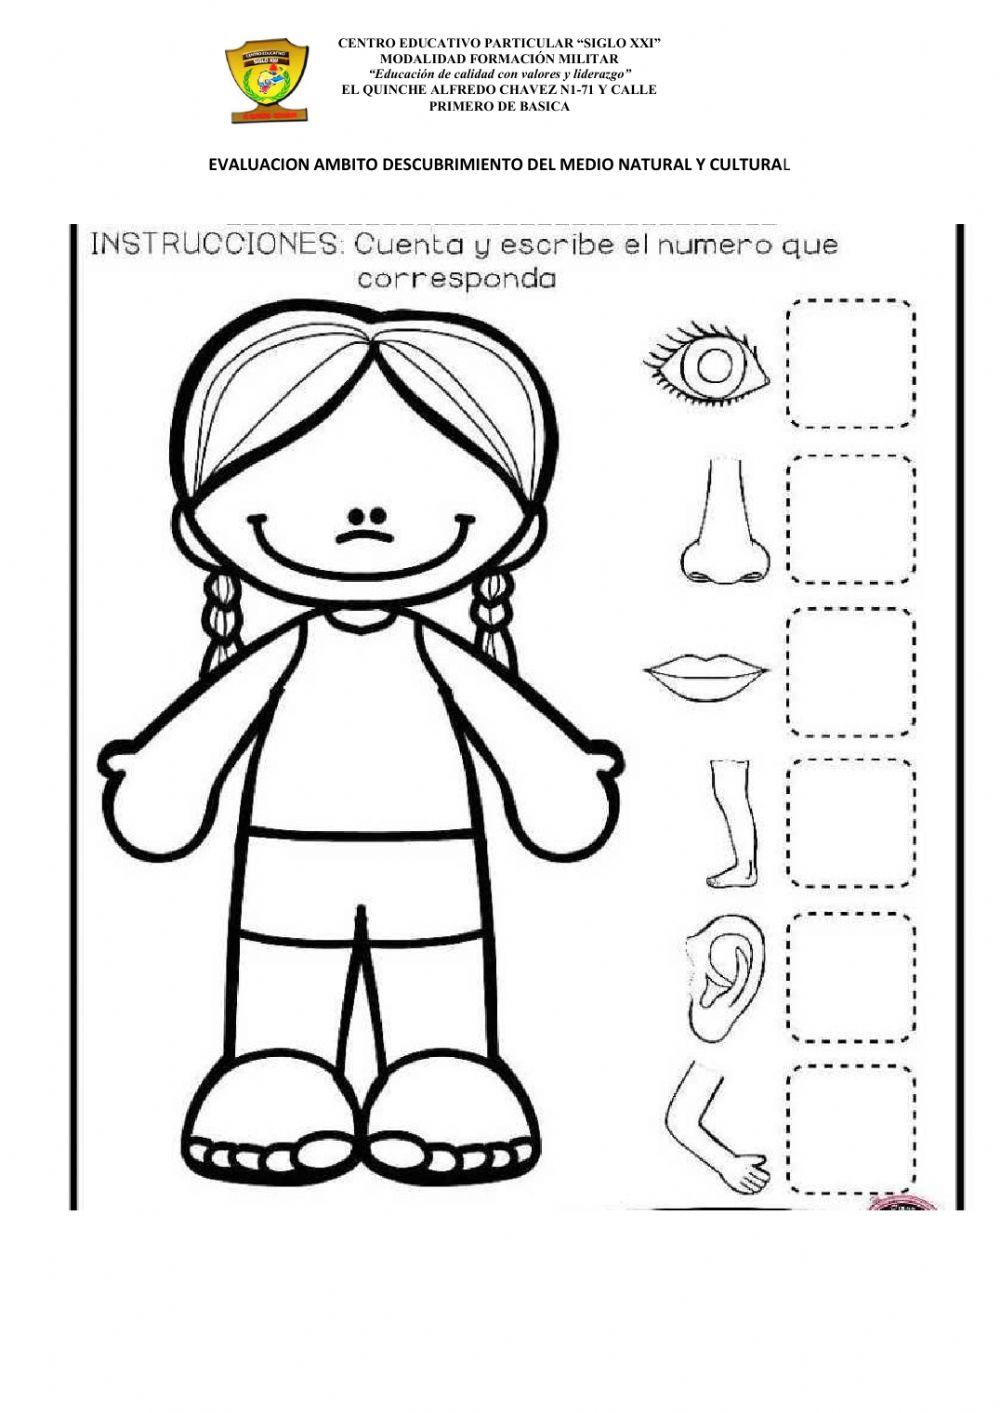 El Cuerpo Humano Online Exercise For 1ro Live Worksheets